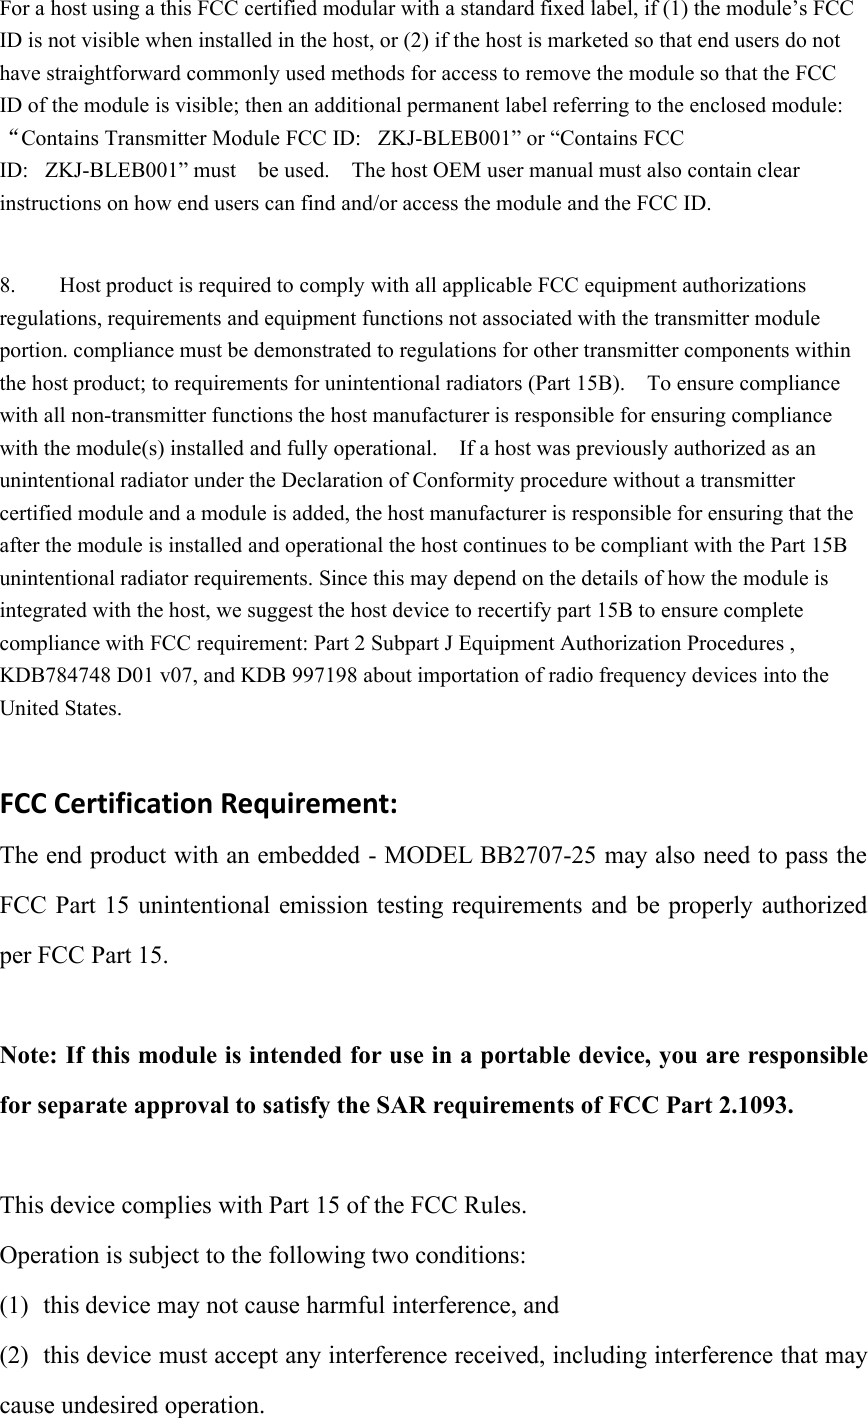 For a host using a this FCC certified modular with a standard fixed label, if (1) the module’s FCCID is not visible when installed in the host, or (2) if the host is marketed so that end users do nothave straightforward commonly used methods for access to remove the module so that the FCCID of the module is visible; then an additional permanent label referring to the enclosed module:“Contains Transmitter Module FCC ID: ZKJ-BLEB001” or “Contains FCCID: ZKJ-BLEB001” must be used. The host OEM user manual must also contain clearinstructions on how end users can find and/or access the module and the FCC ID.8. Host product is required to comply with all applicable FCC equipment authorizationsregulations, requirements and equipment functions not associated with the transmitter moduleportion. compliance must be demonstrated to regulations for other transmitter components withinthe host product; to requirements for unintentional radiators (Part 15B). To ensure compliancewith all non-transmitter functions the host manufacturer is responsible for ensuring compliancewith the module(s) installed and fully operational. If a host was previously authorized as anunintentional radiator under the Declaration of Conformity procedure without a transmittercertified module and a module is added, the host manufacturer is responsible for ensuring that theafter the module is installed and operational the host continues to be compliant with the Part 15Bunintentional radiator requirements. Since this may depend on the details of how the module isintegrated with the host, we suggest the host device to recertify part 15B to ensure completecompliance with FCC requirement: Part 2 Subpart J Equipment Authorization Procedures ,KDB784748 D01 v07, and KDB 997198 about importation of radio frequency devices into theUnited States.FCC Certification Requirement:The end product with an embedded - MODEL BB2707-25 may also need to pass theFCC Part 15 unintentional emission testing requirements and be properly authorizedper FCC Part 15.Note: If this module is intended for use in a portable device, you are responsiblefor separate approval to satisfy the SAR requirements of FCC Part 2.1093.This device complies with Part 15 of the FCC Rules.Operation is subject to the following two conditions:(1) this device may not cause harmful interference, and(2) this device must accept any interference received, including interference that maycause undesired operation.